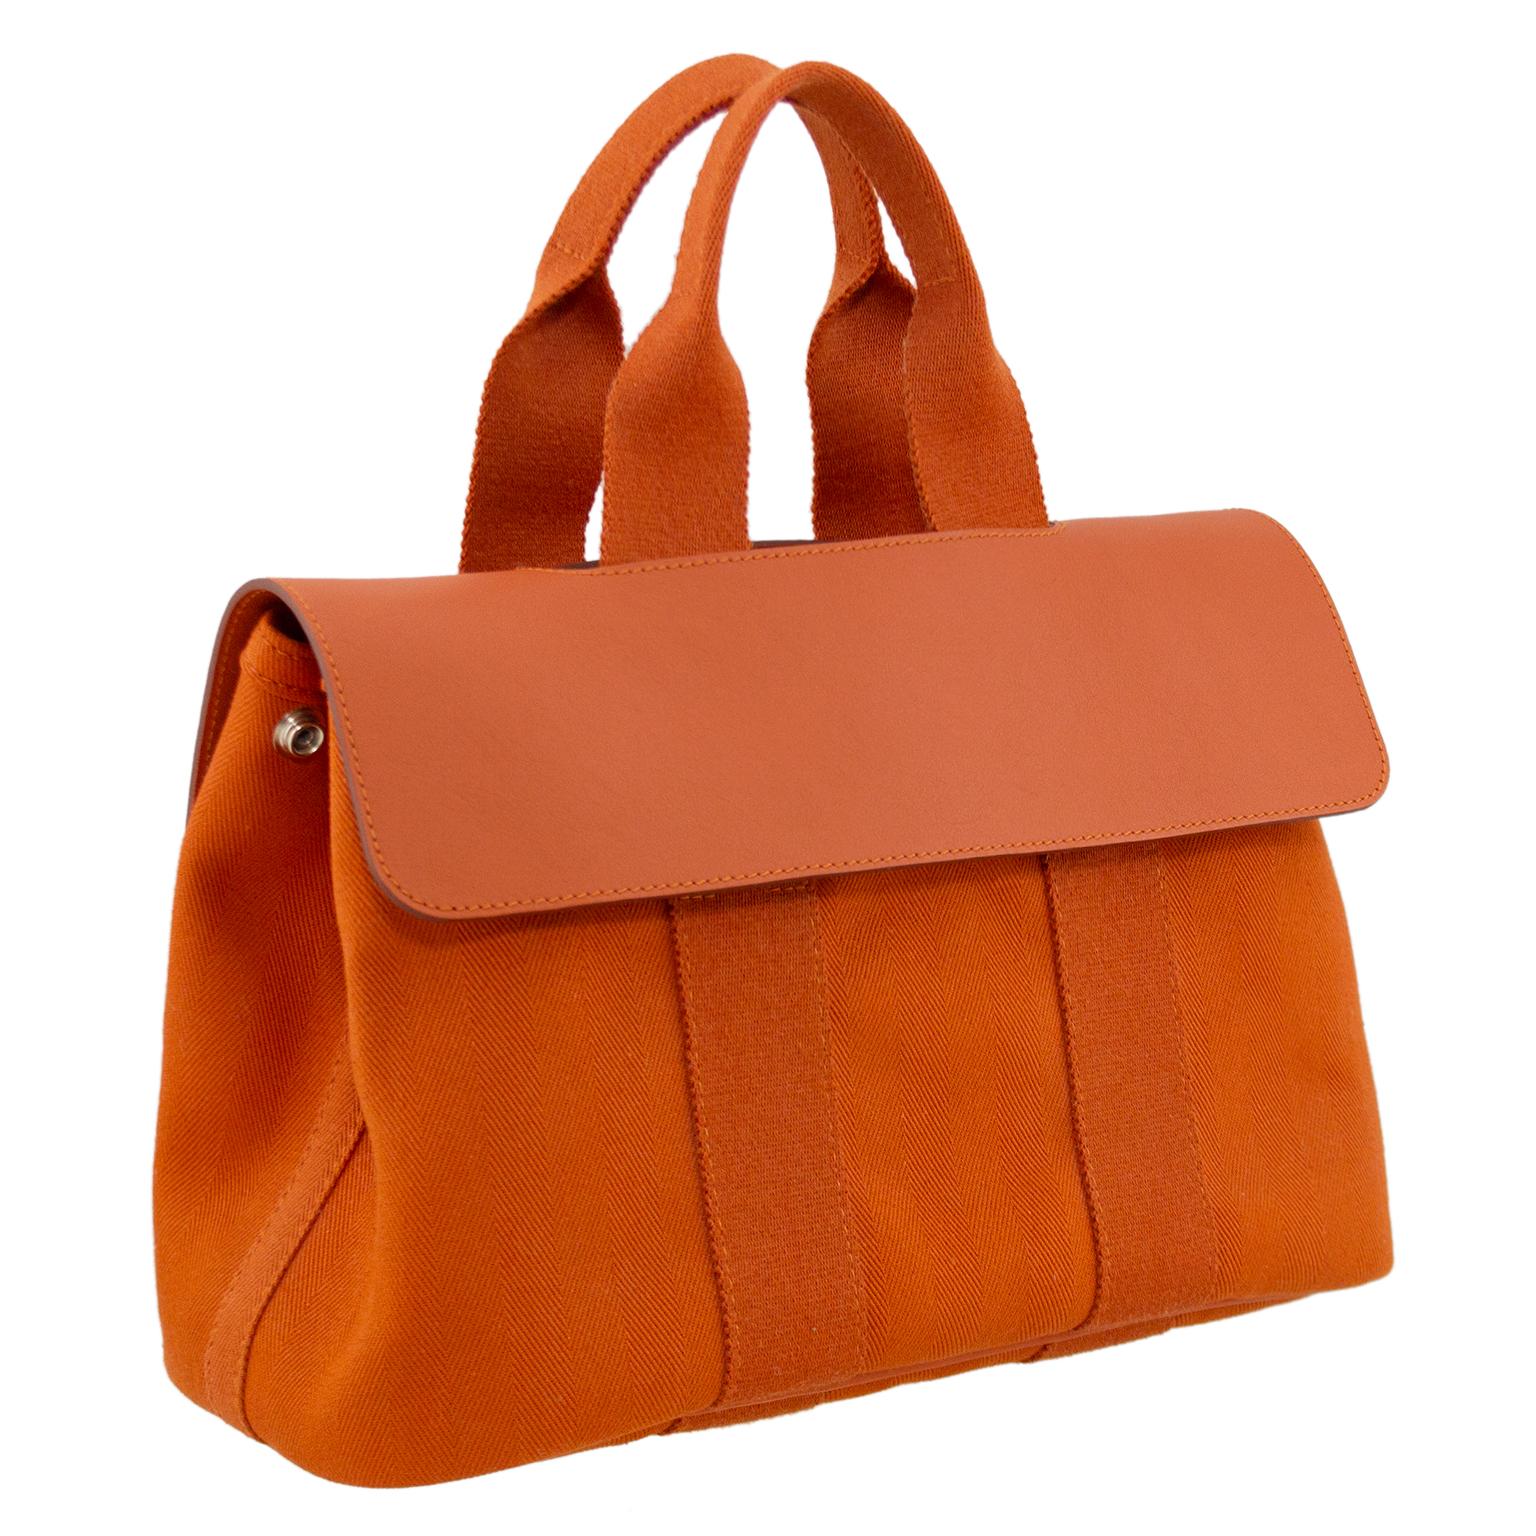 Embodying the Hermès essence, the Valparaiso PM handbag is handcrafted with simple lines and minimalistic construction. In a brick orange hue, this everlasting piece features a toile body and rounded top handles with a calf leather fold over